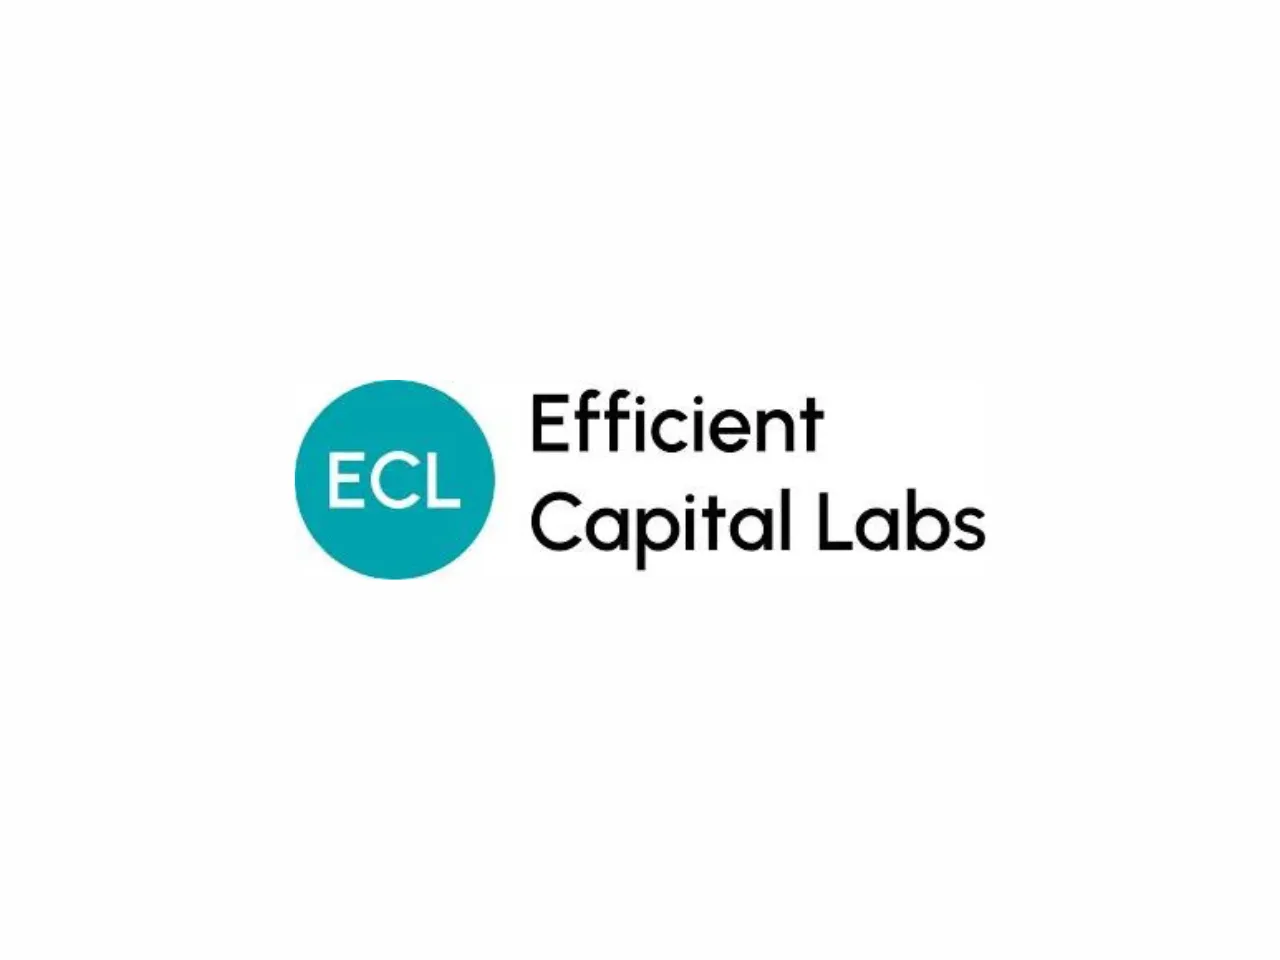 Fintech startup Efficient Capital Labs raises $7M in funding led by QED Investors, others